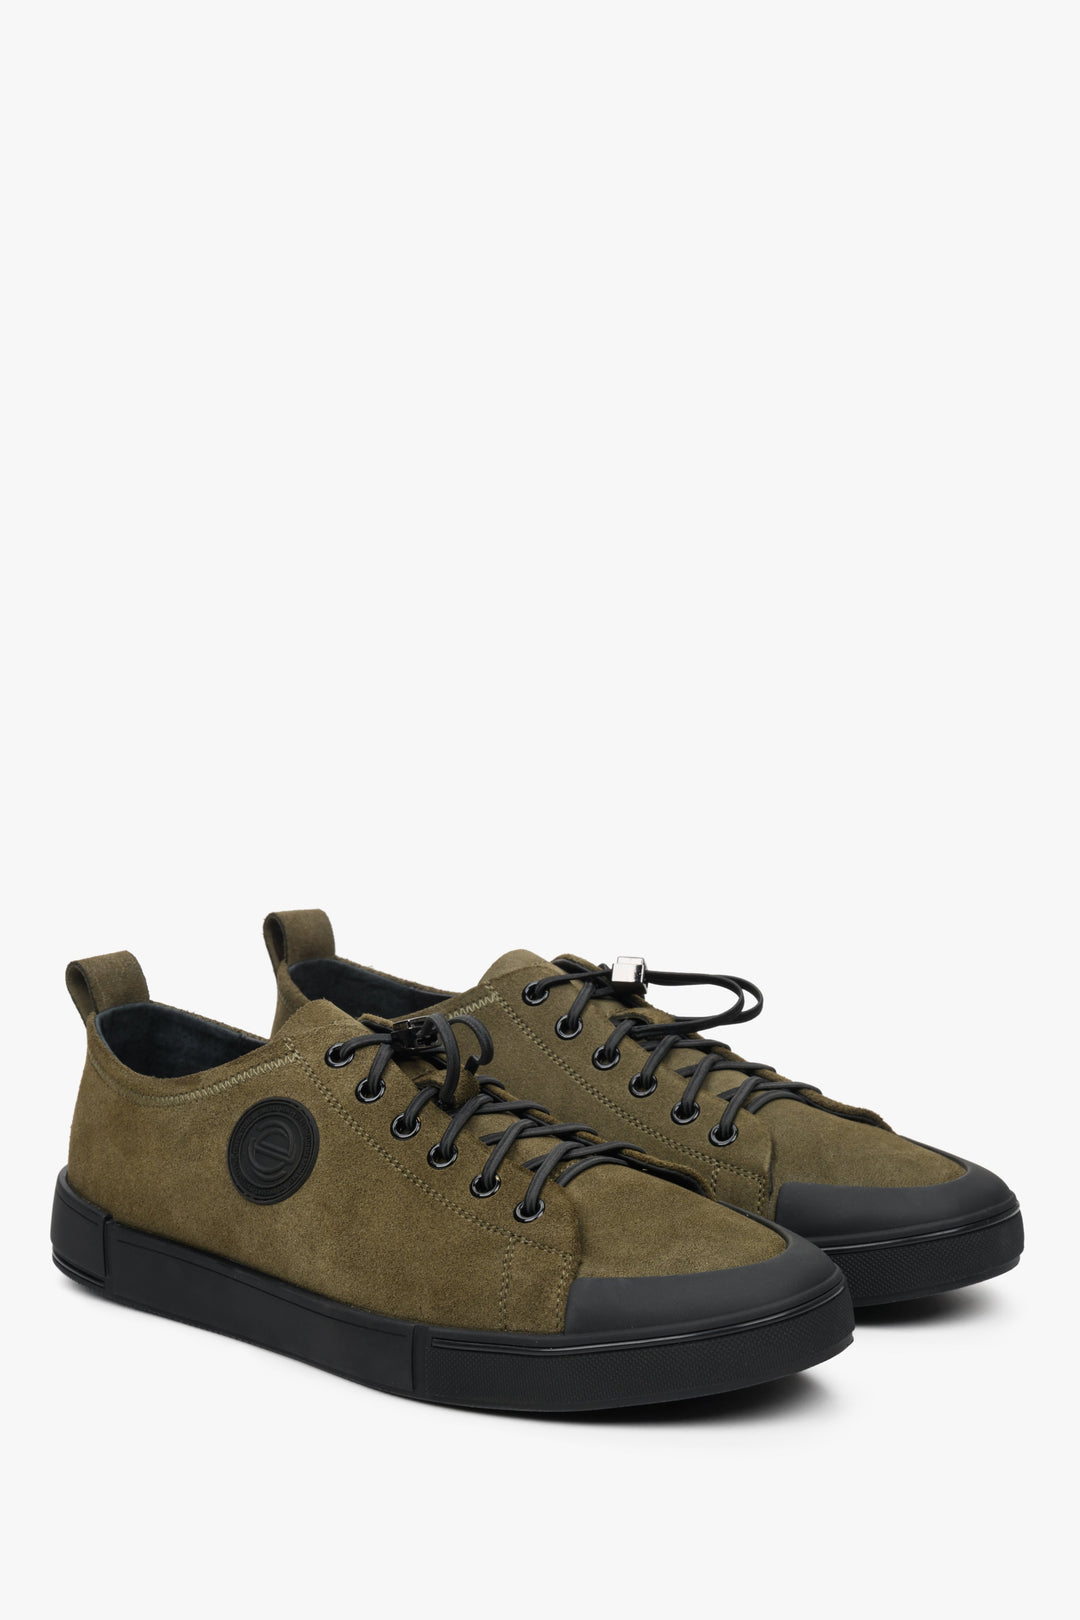 Men's Estro sneakers in green made of genuine leather.